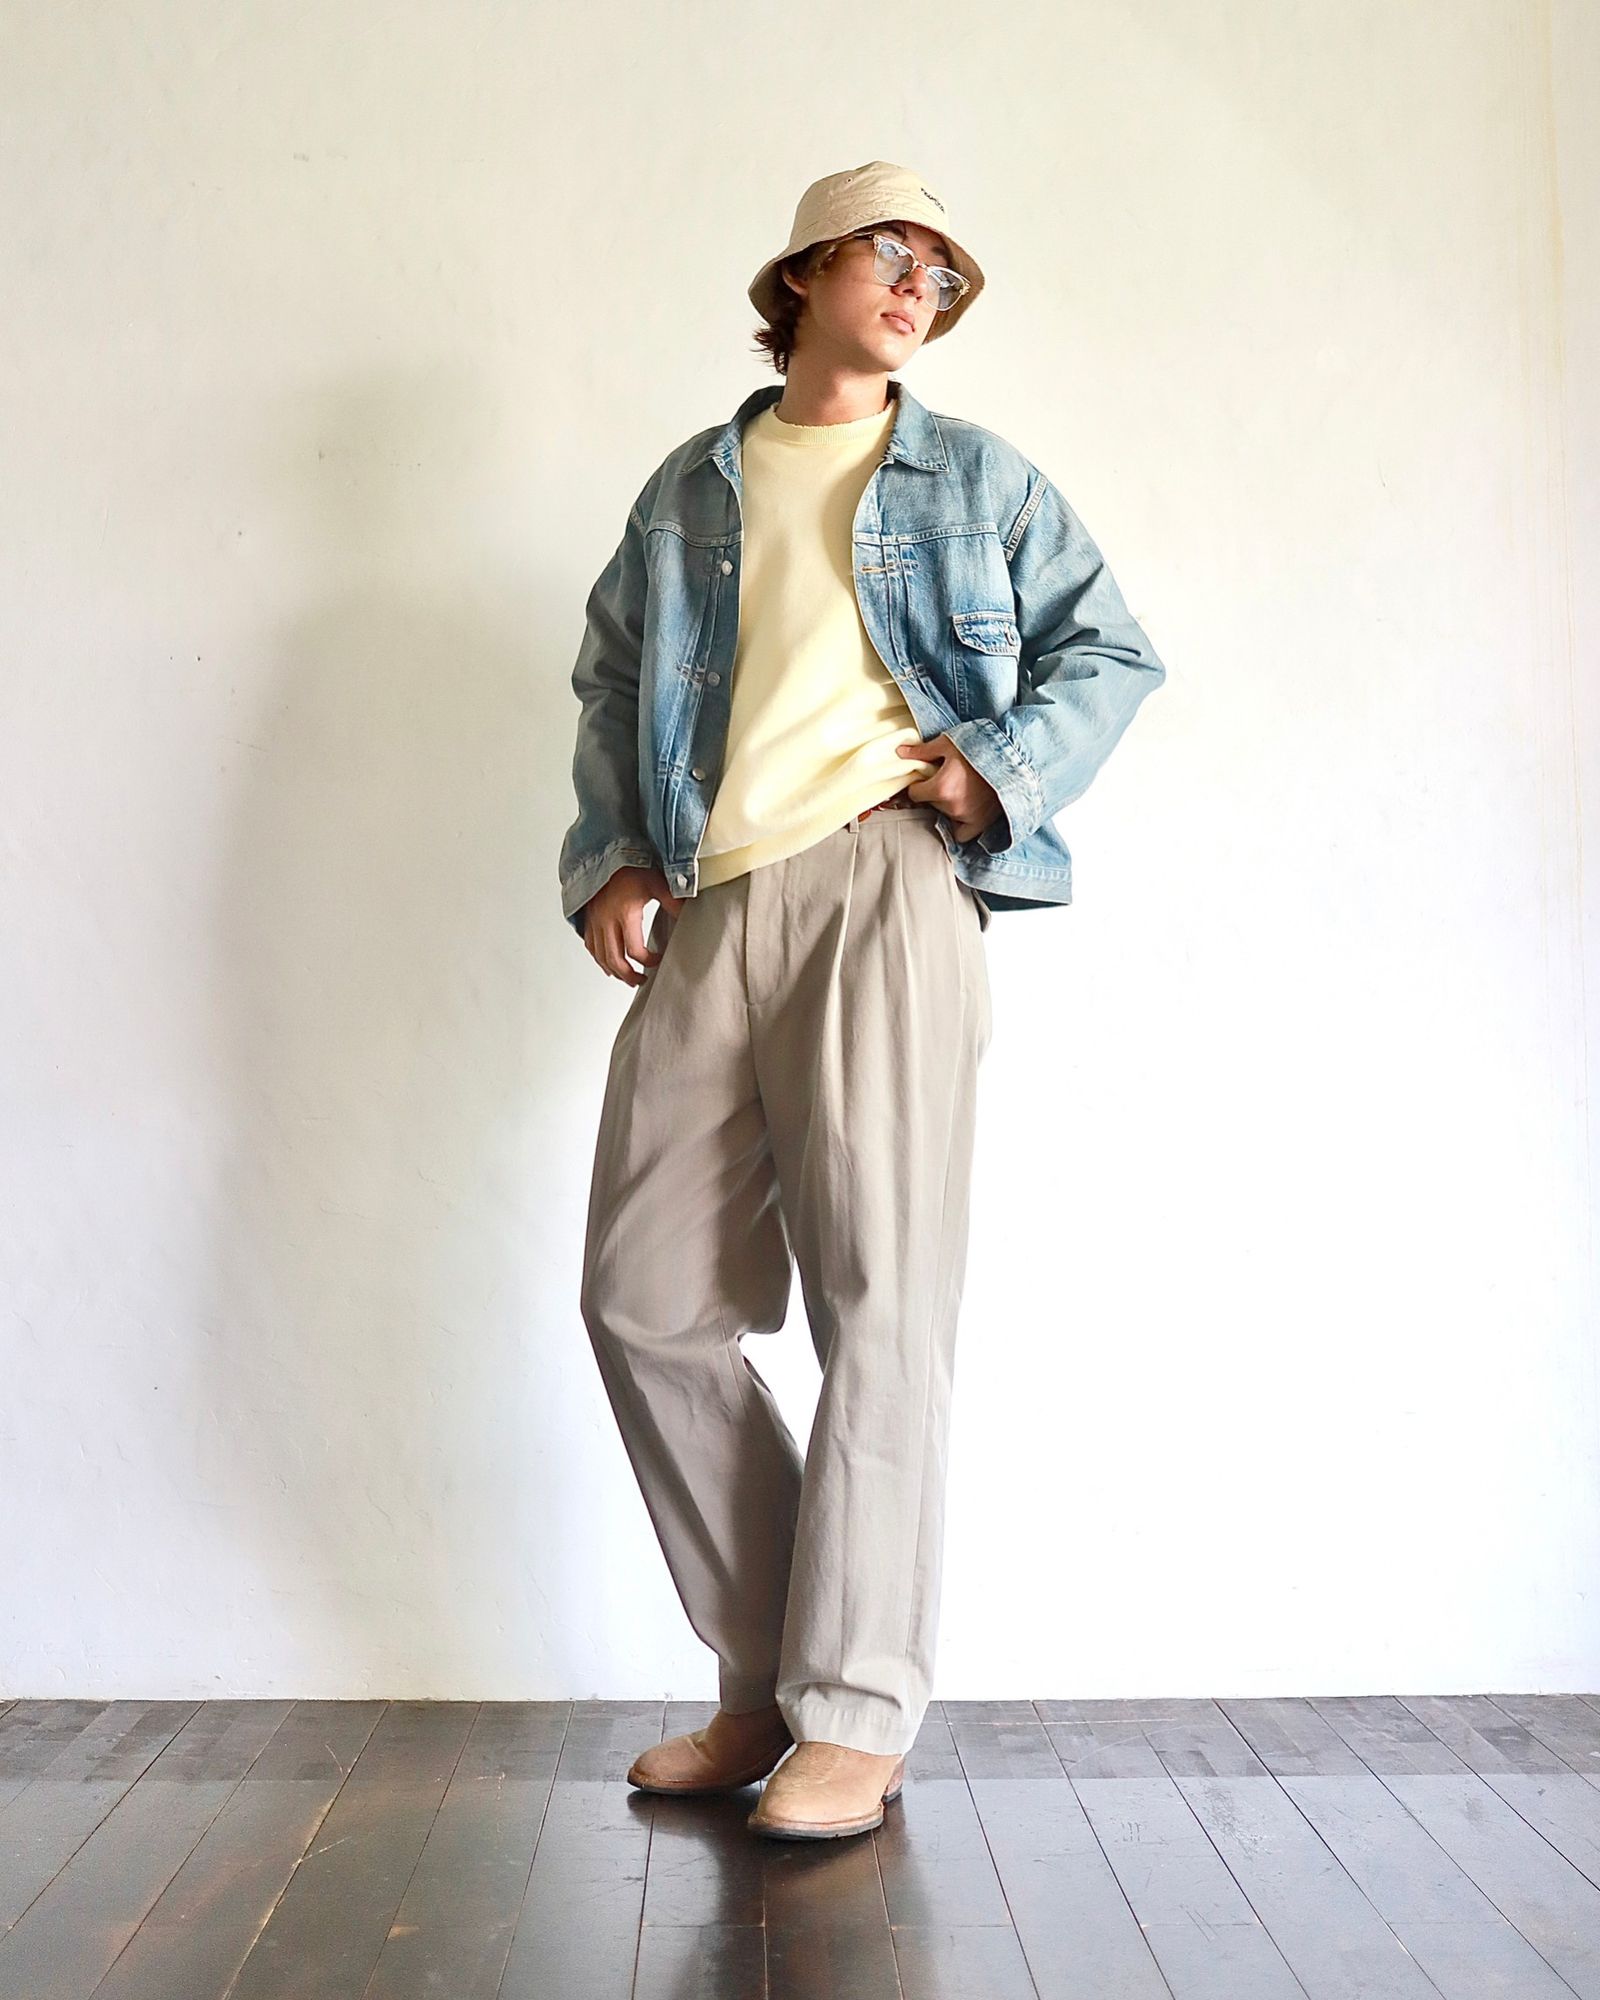 A.PRESSE 23AW Type.2 Chino Trousers